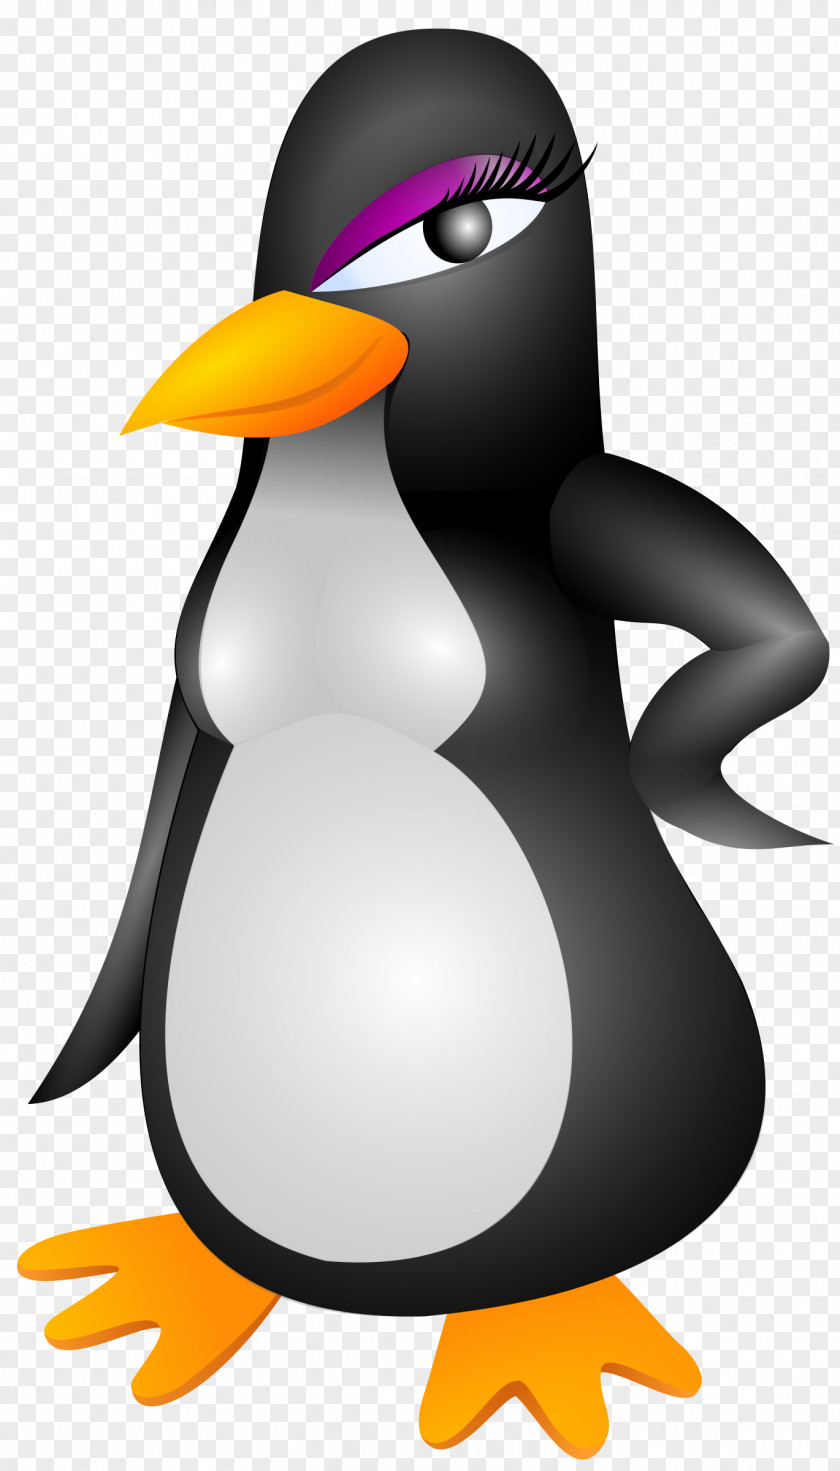 Penguin King Vector Graphics Clip Art Image PNG